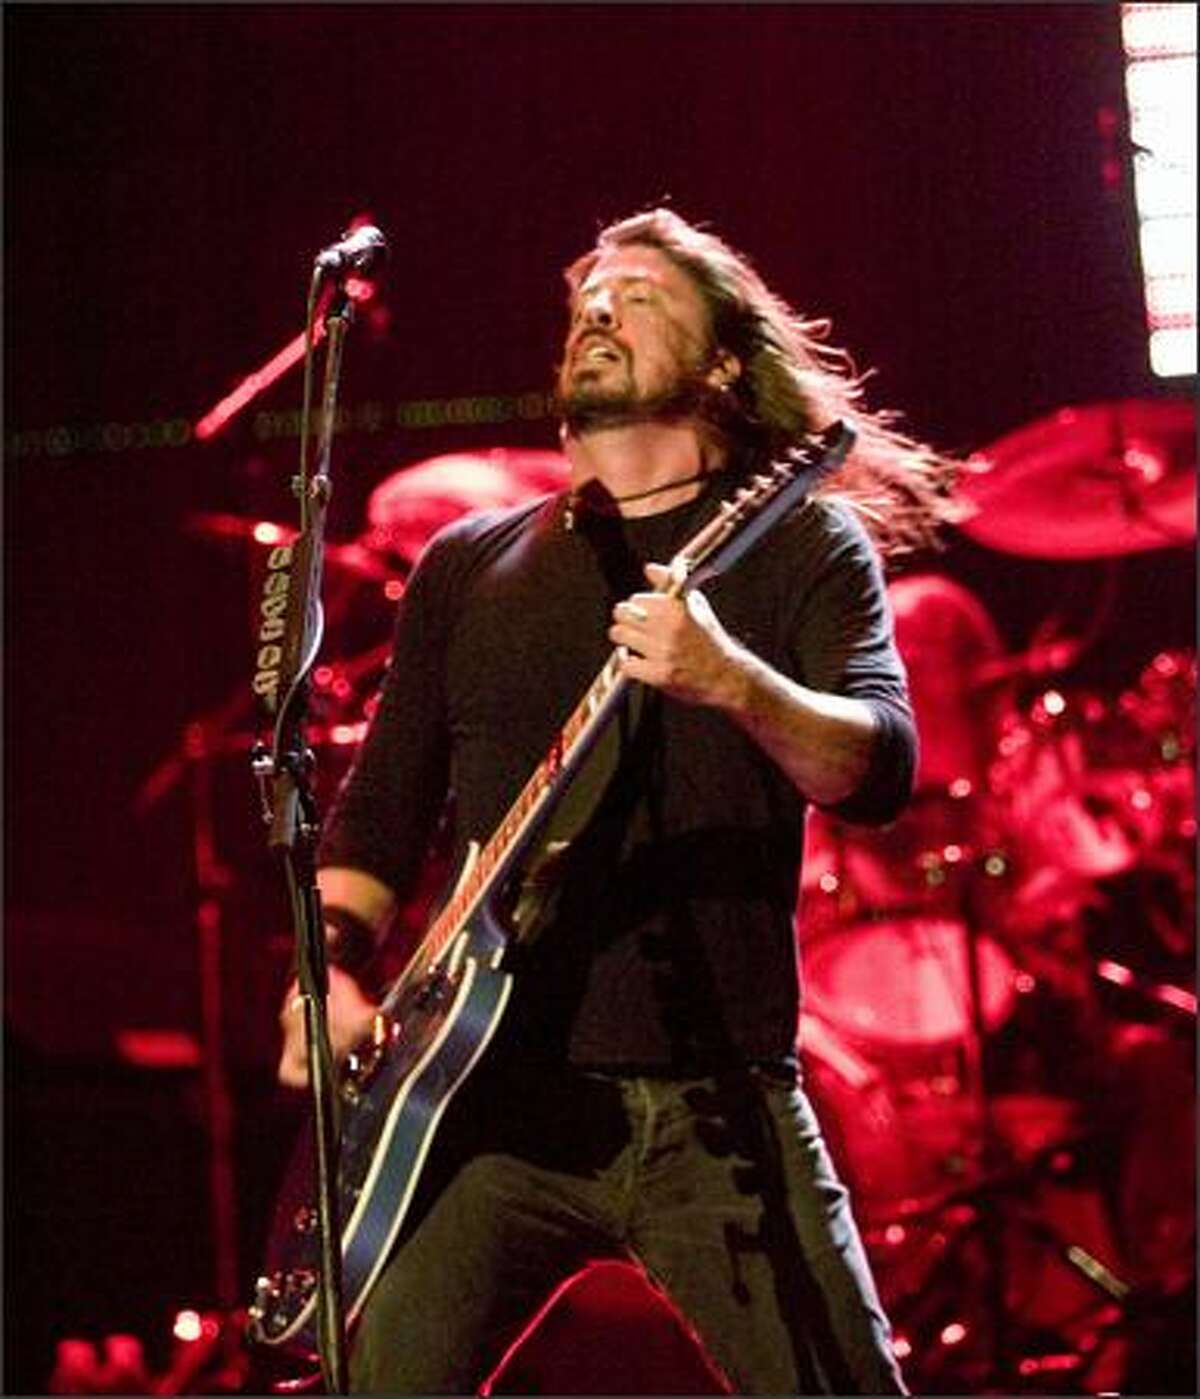 Dave Grohl, lead singer, performs.